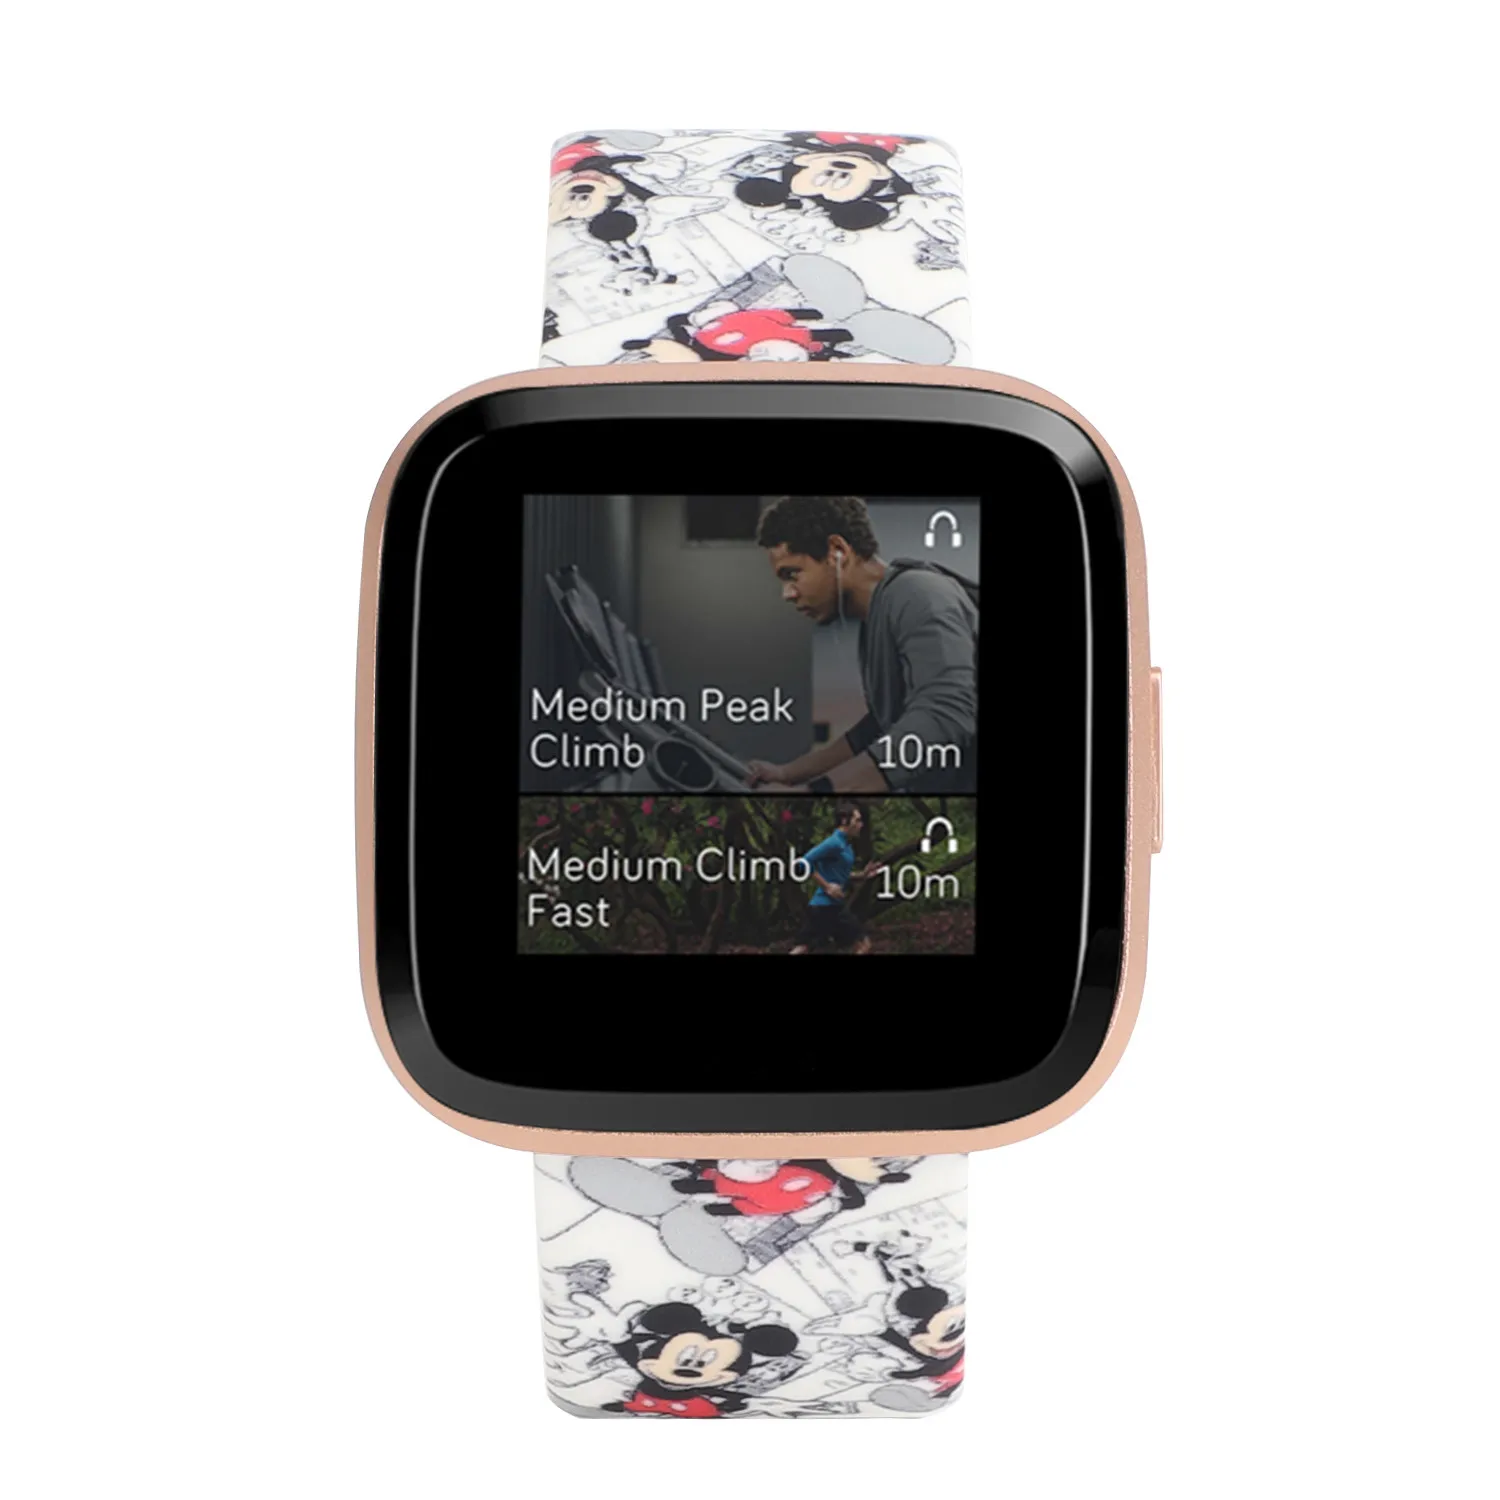 Cartoon Band For Apple Watch 42mm 44mm 38mm 40mm,Mouse Silicone Straps